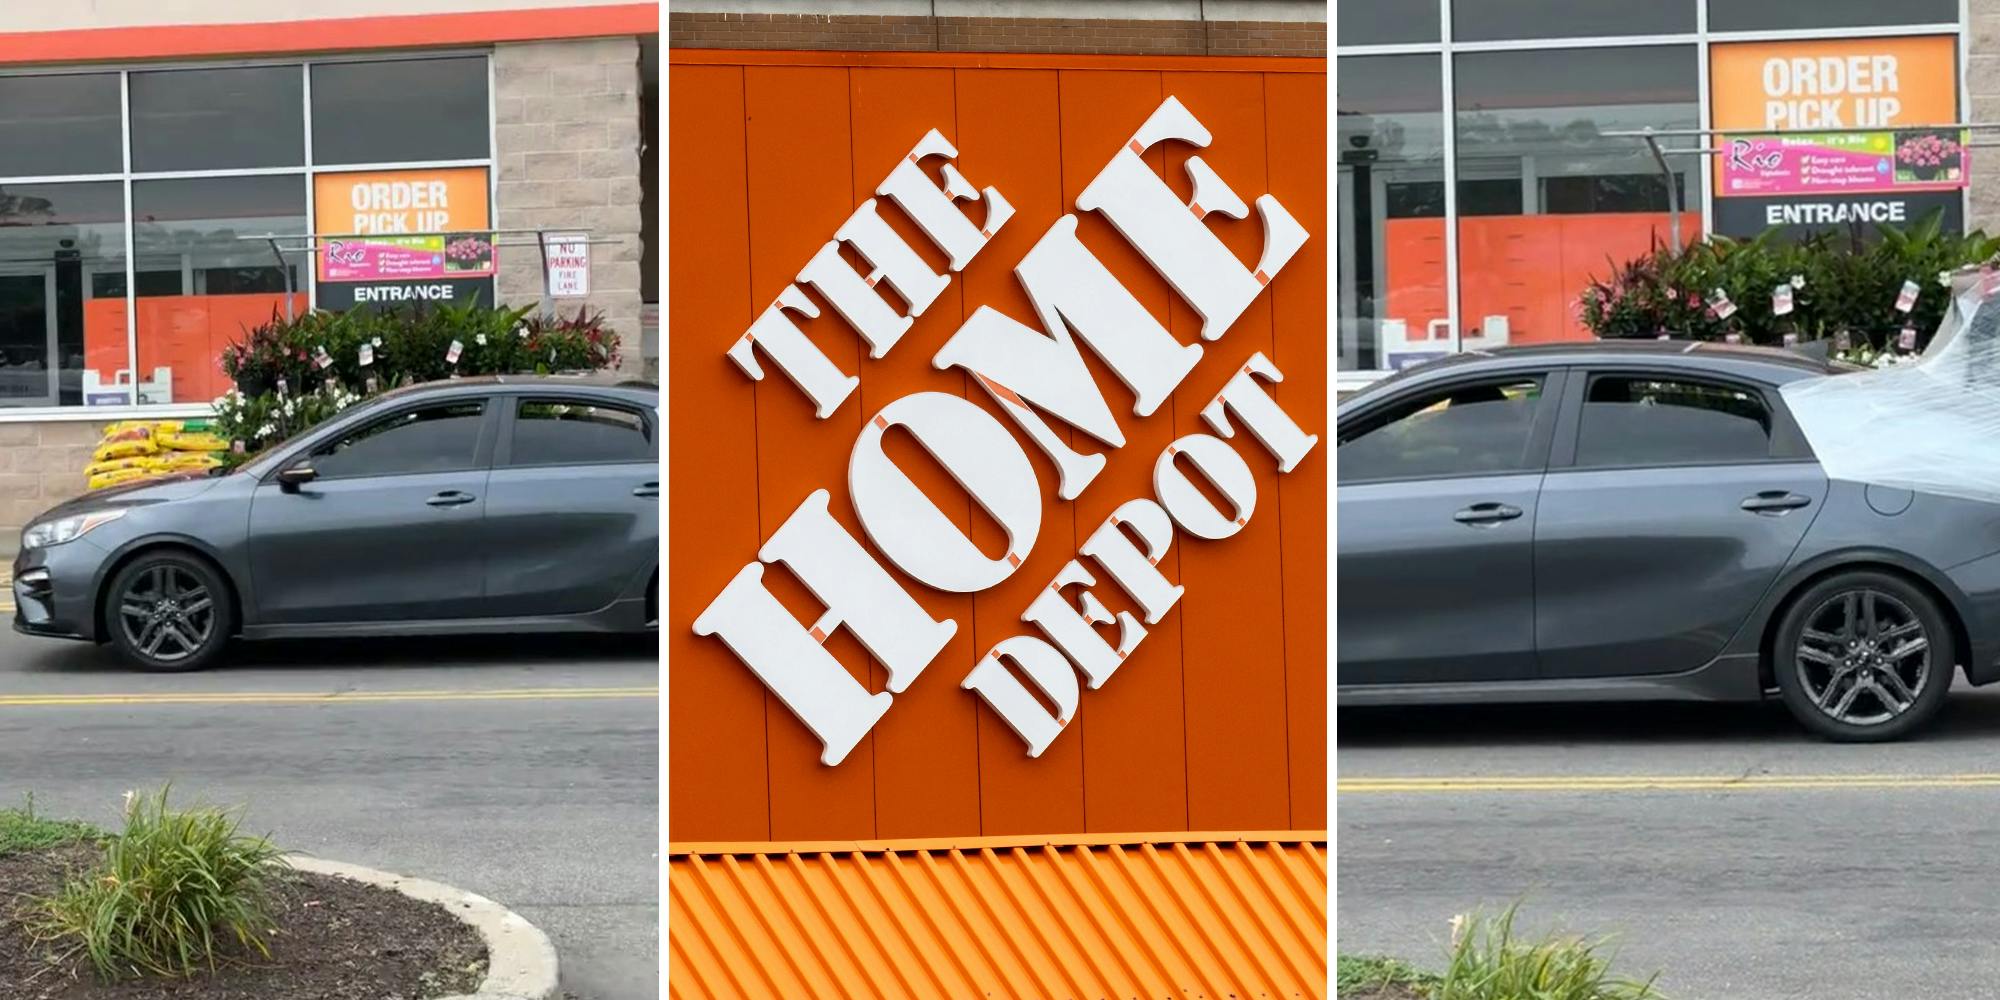 Home Depot shopper has workers pull a surprising trick to haul home